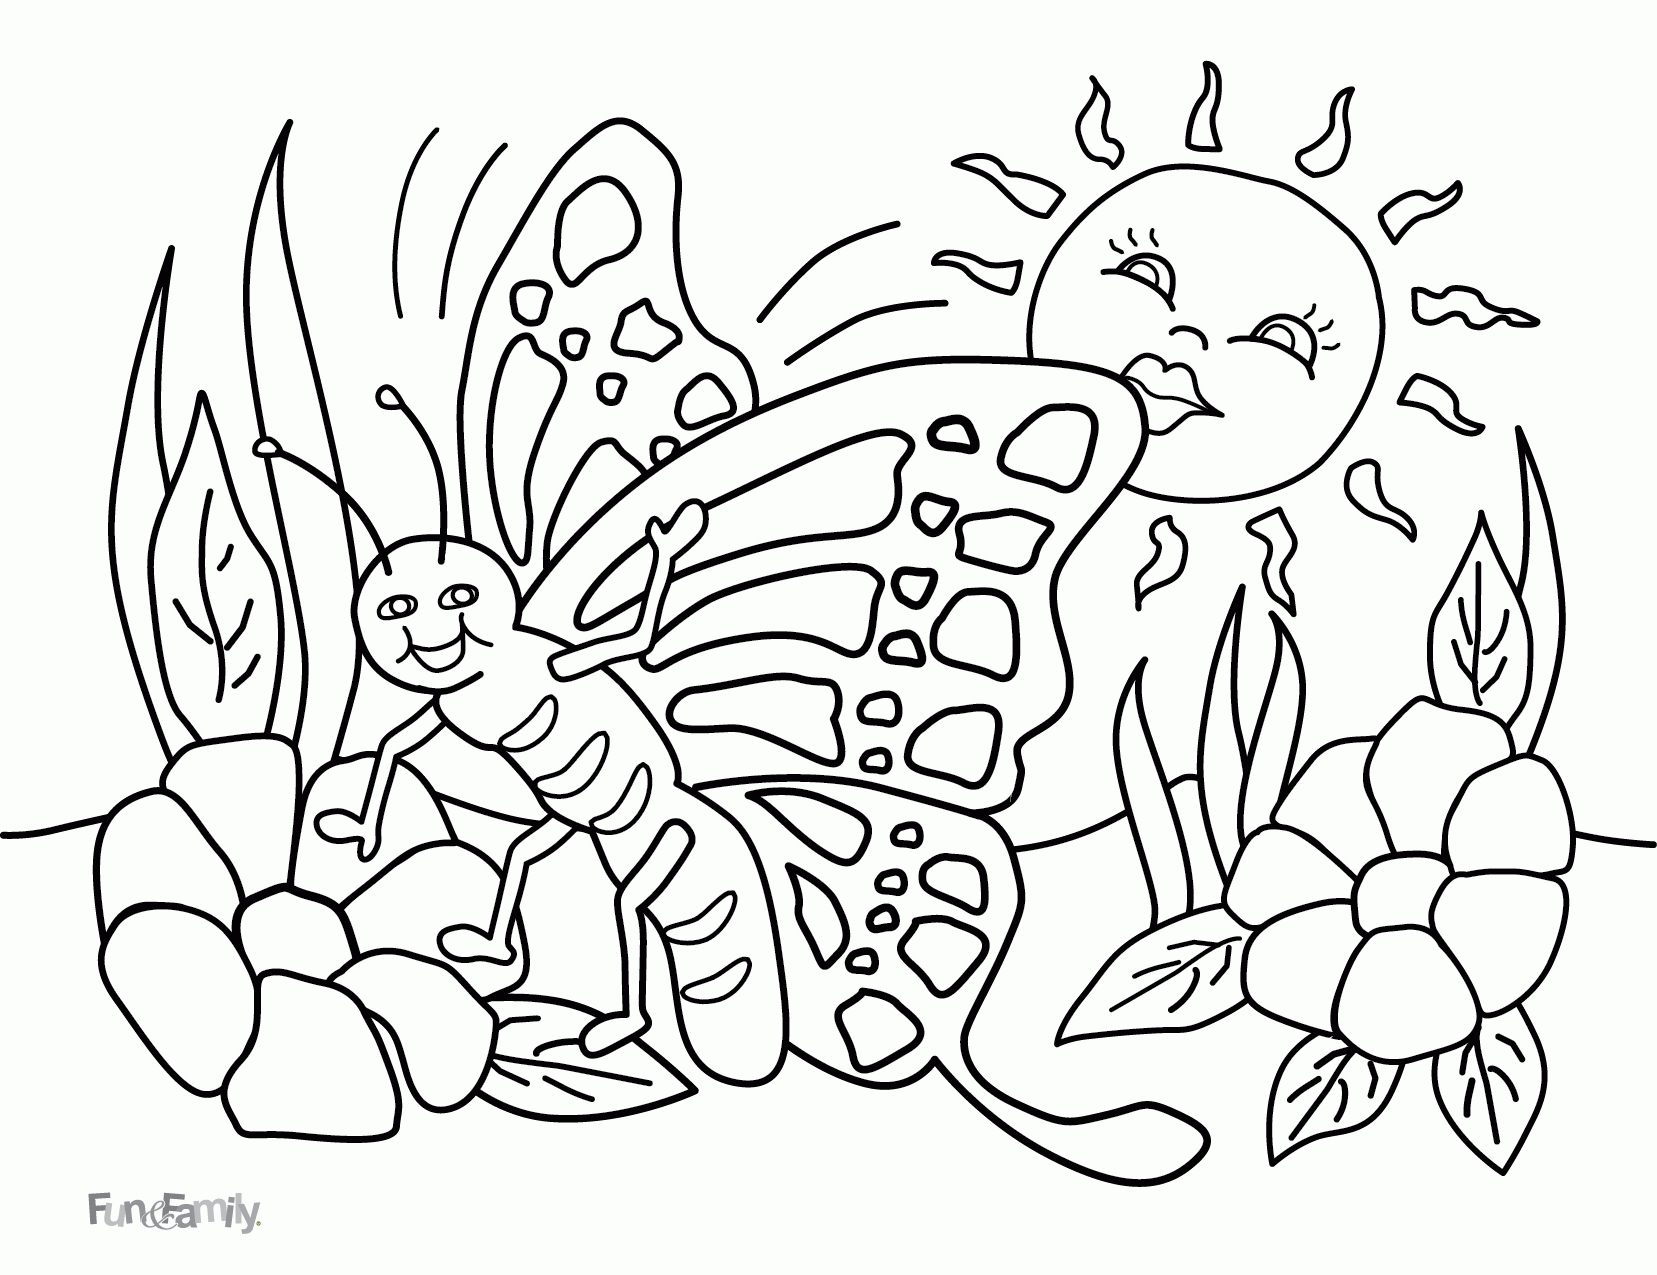 Pdf Coloring Pages For Kids Coloring Pages Printable Coloring Book Fords Pdf Free Download